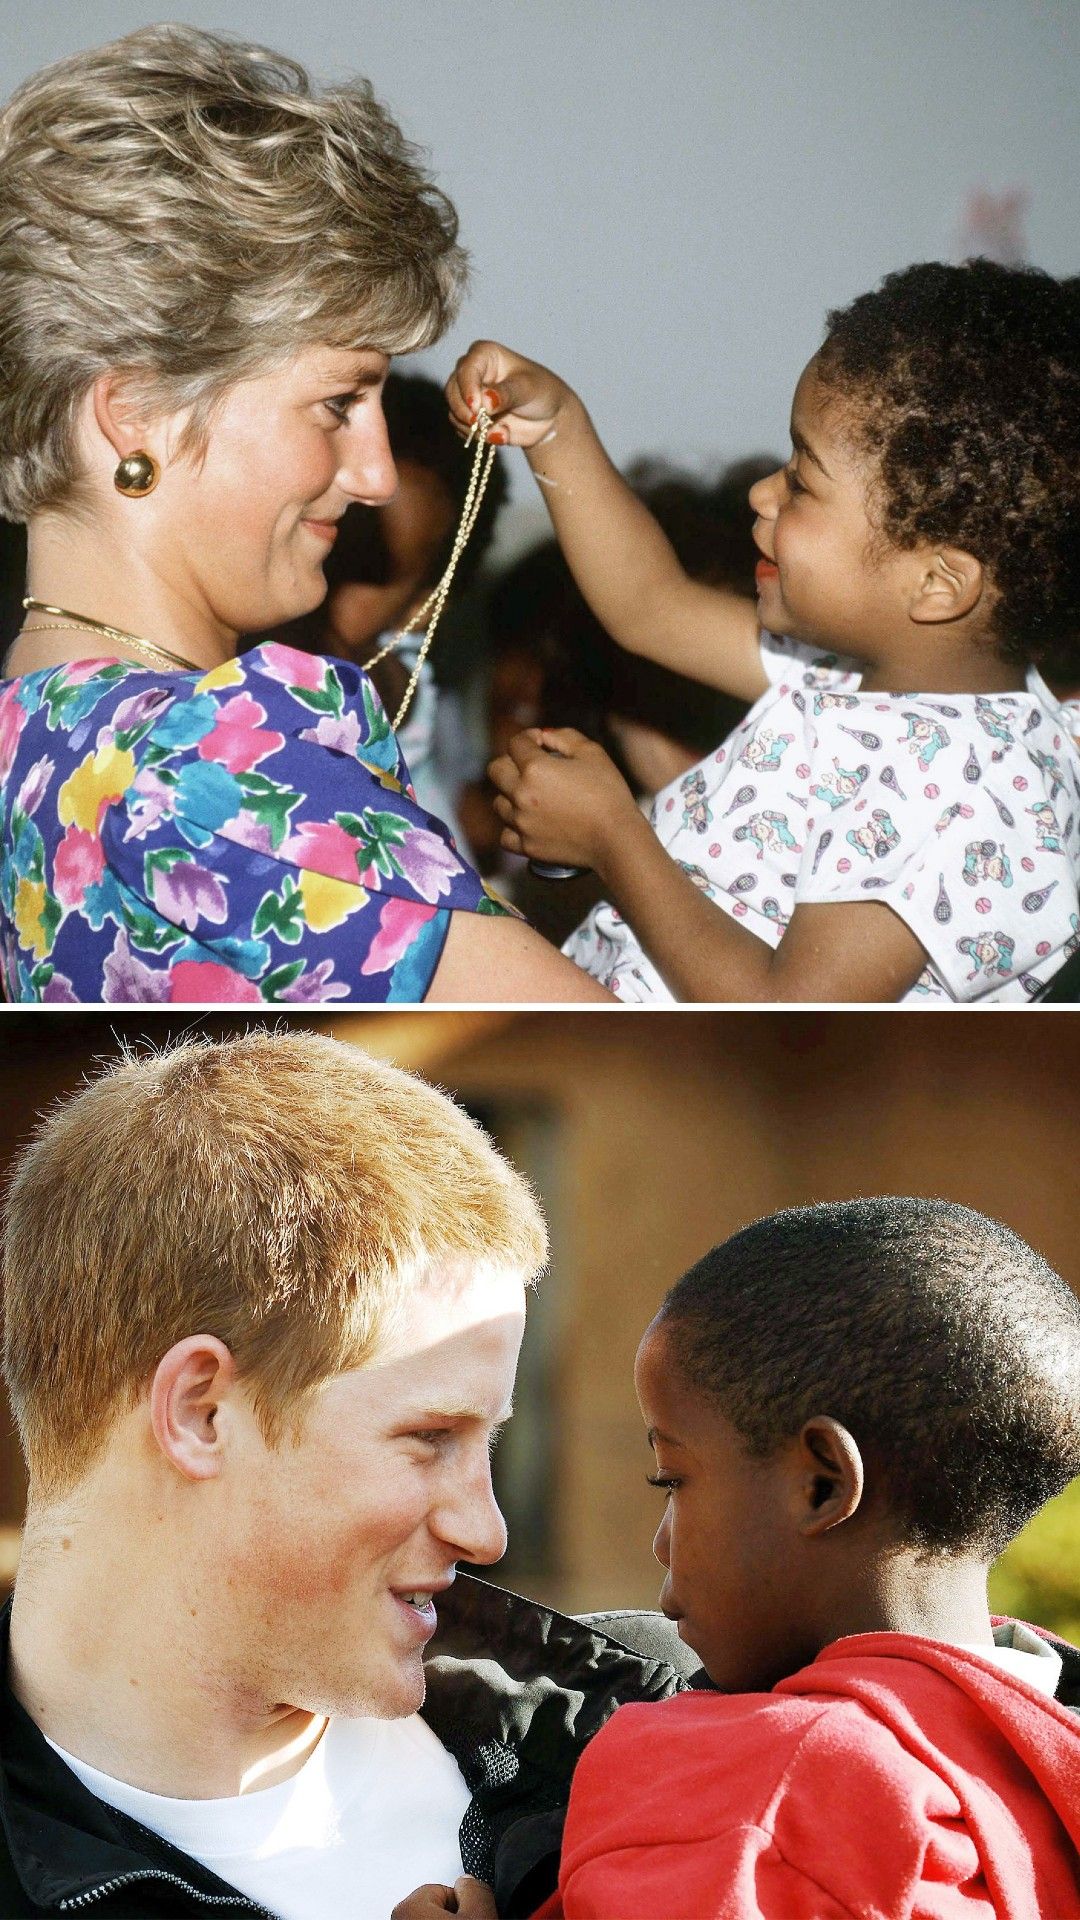 <p>                     <strong>"I intuitively know what my mother would like me to do and want to progress with work she couldn’t complete."</strong>                   </p>                                      <p>                     As Prince Harry started to grow up, he started following his mother's footsteps while still making his own impact. In 2006, Prince Harry and Prince Seeiso of Lesotho founded the charity Sentebale, which helps children affected by HIV in Lesotho. It was work Diana was incredibly passionate about, and Sentebale translates to "forget me not" in Sesotho, the language of the area - a tribute to the late Princess.                    </p>